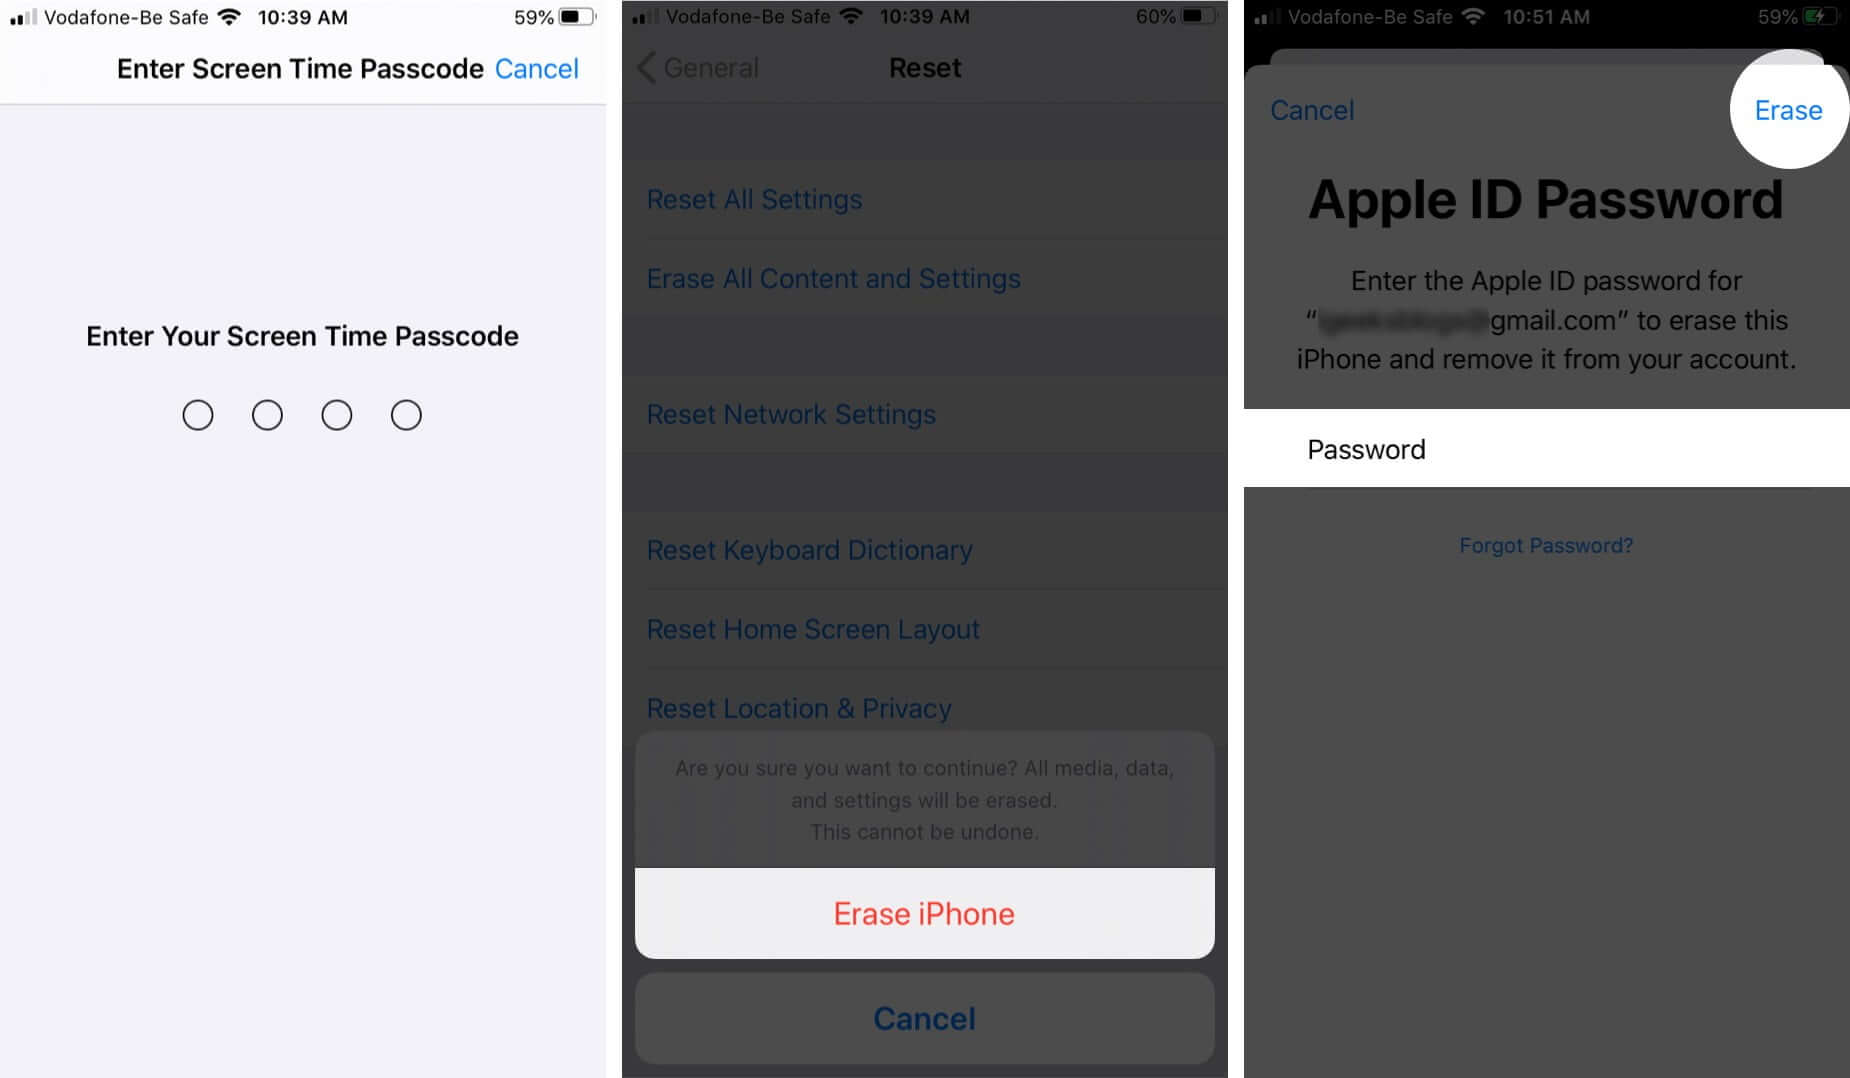 use-screen-time-passcode-tap-on-erase-iphone-and-enter-apple-id-password-and-tap-on-erase